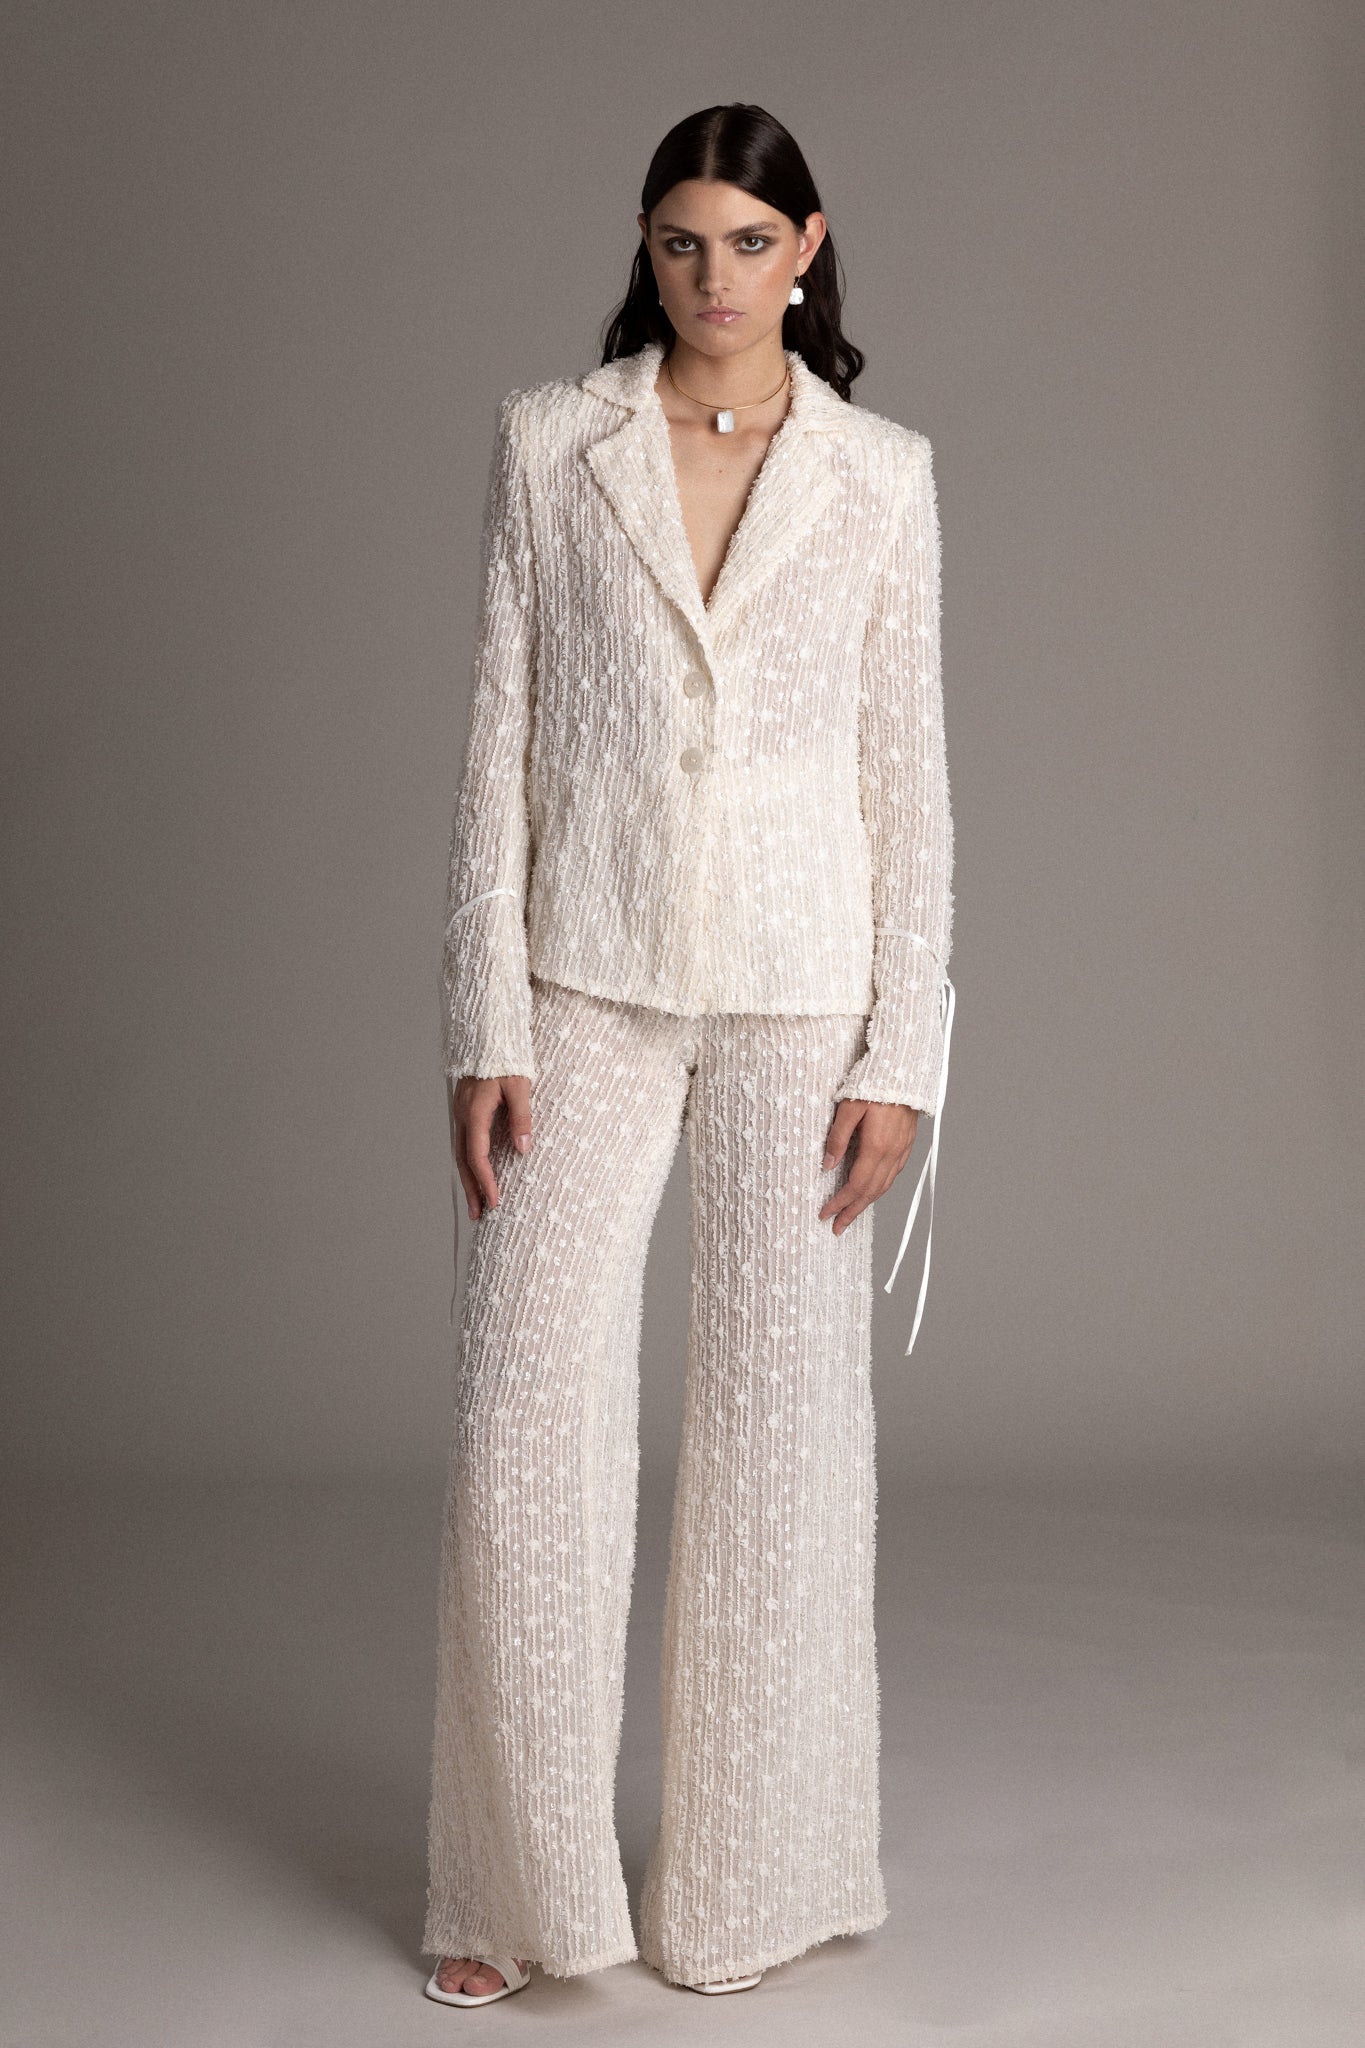 EMBROIDERED BLAZER WITH STRINGS